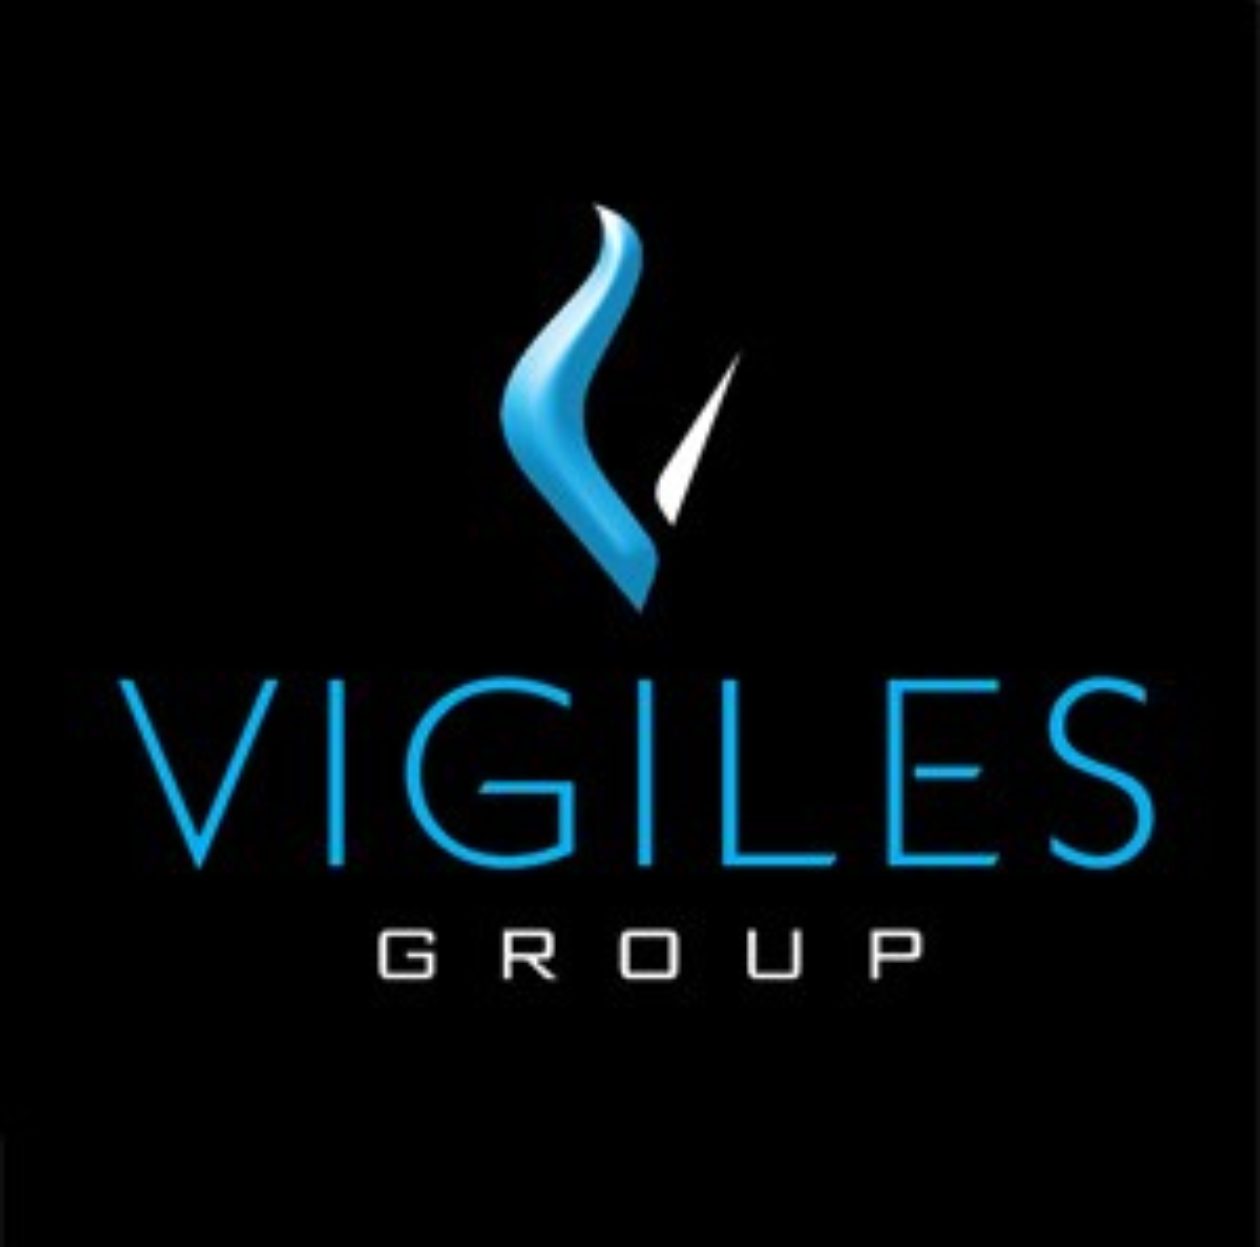 Vigiles Group dramatically improve fire safety in Univerisites through groundbreaking AR technology